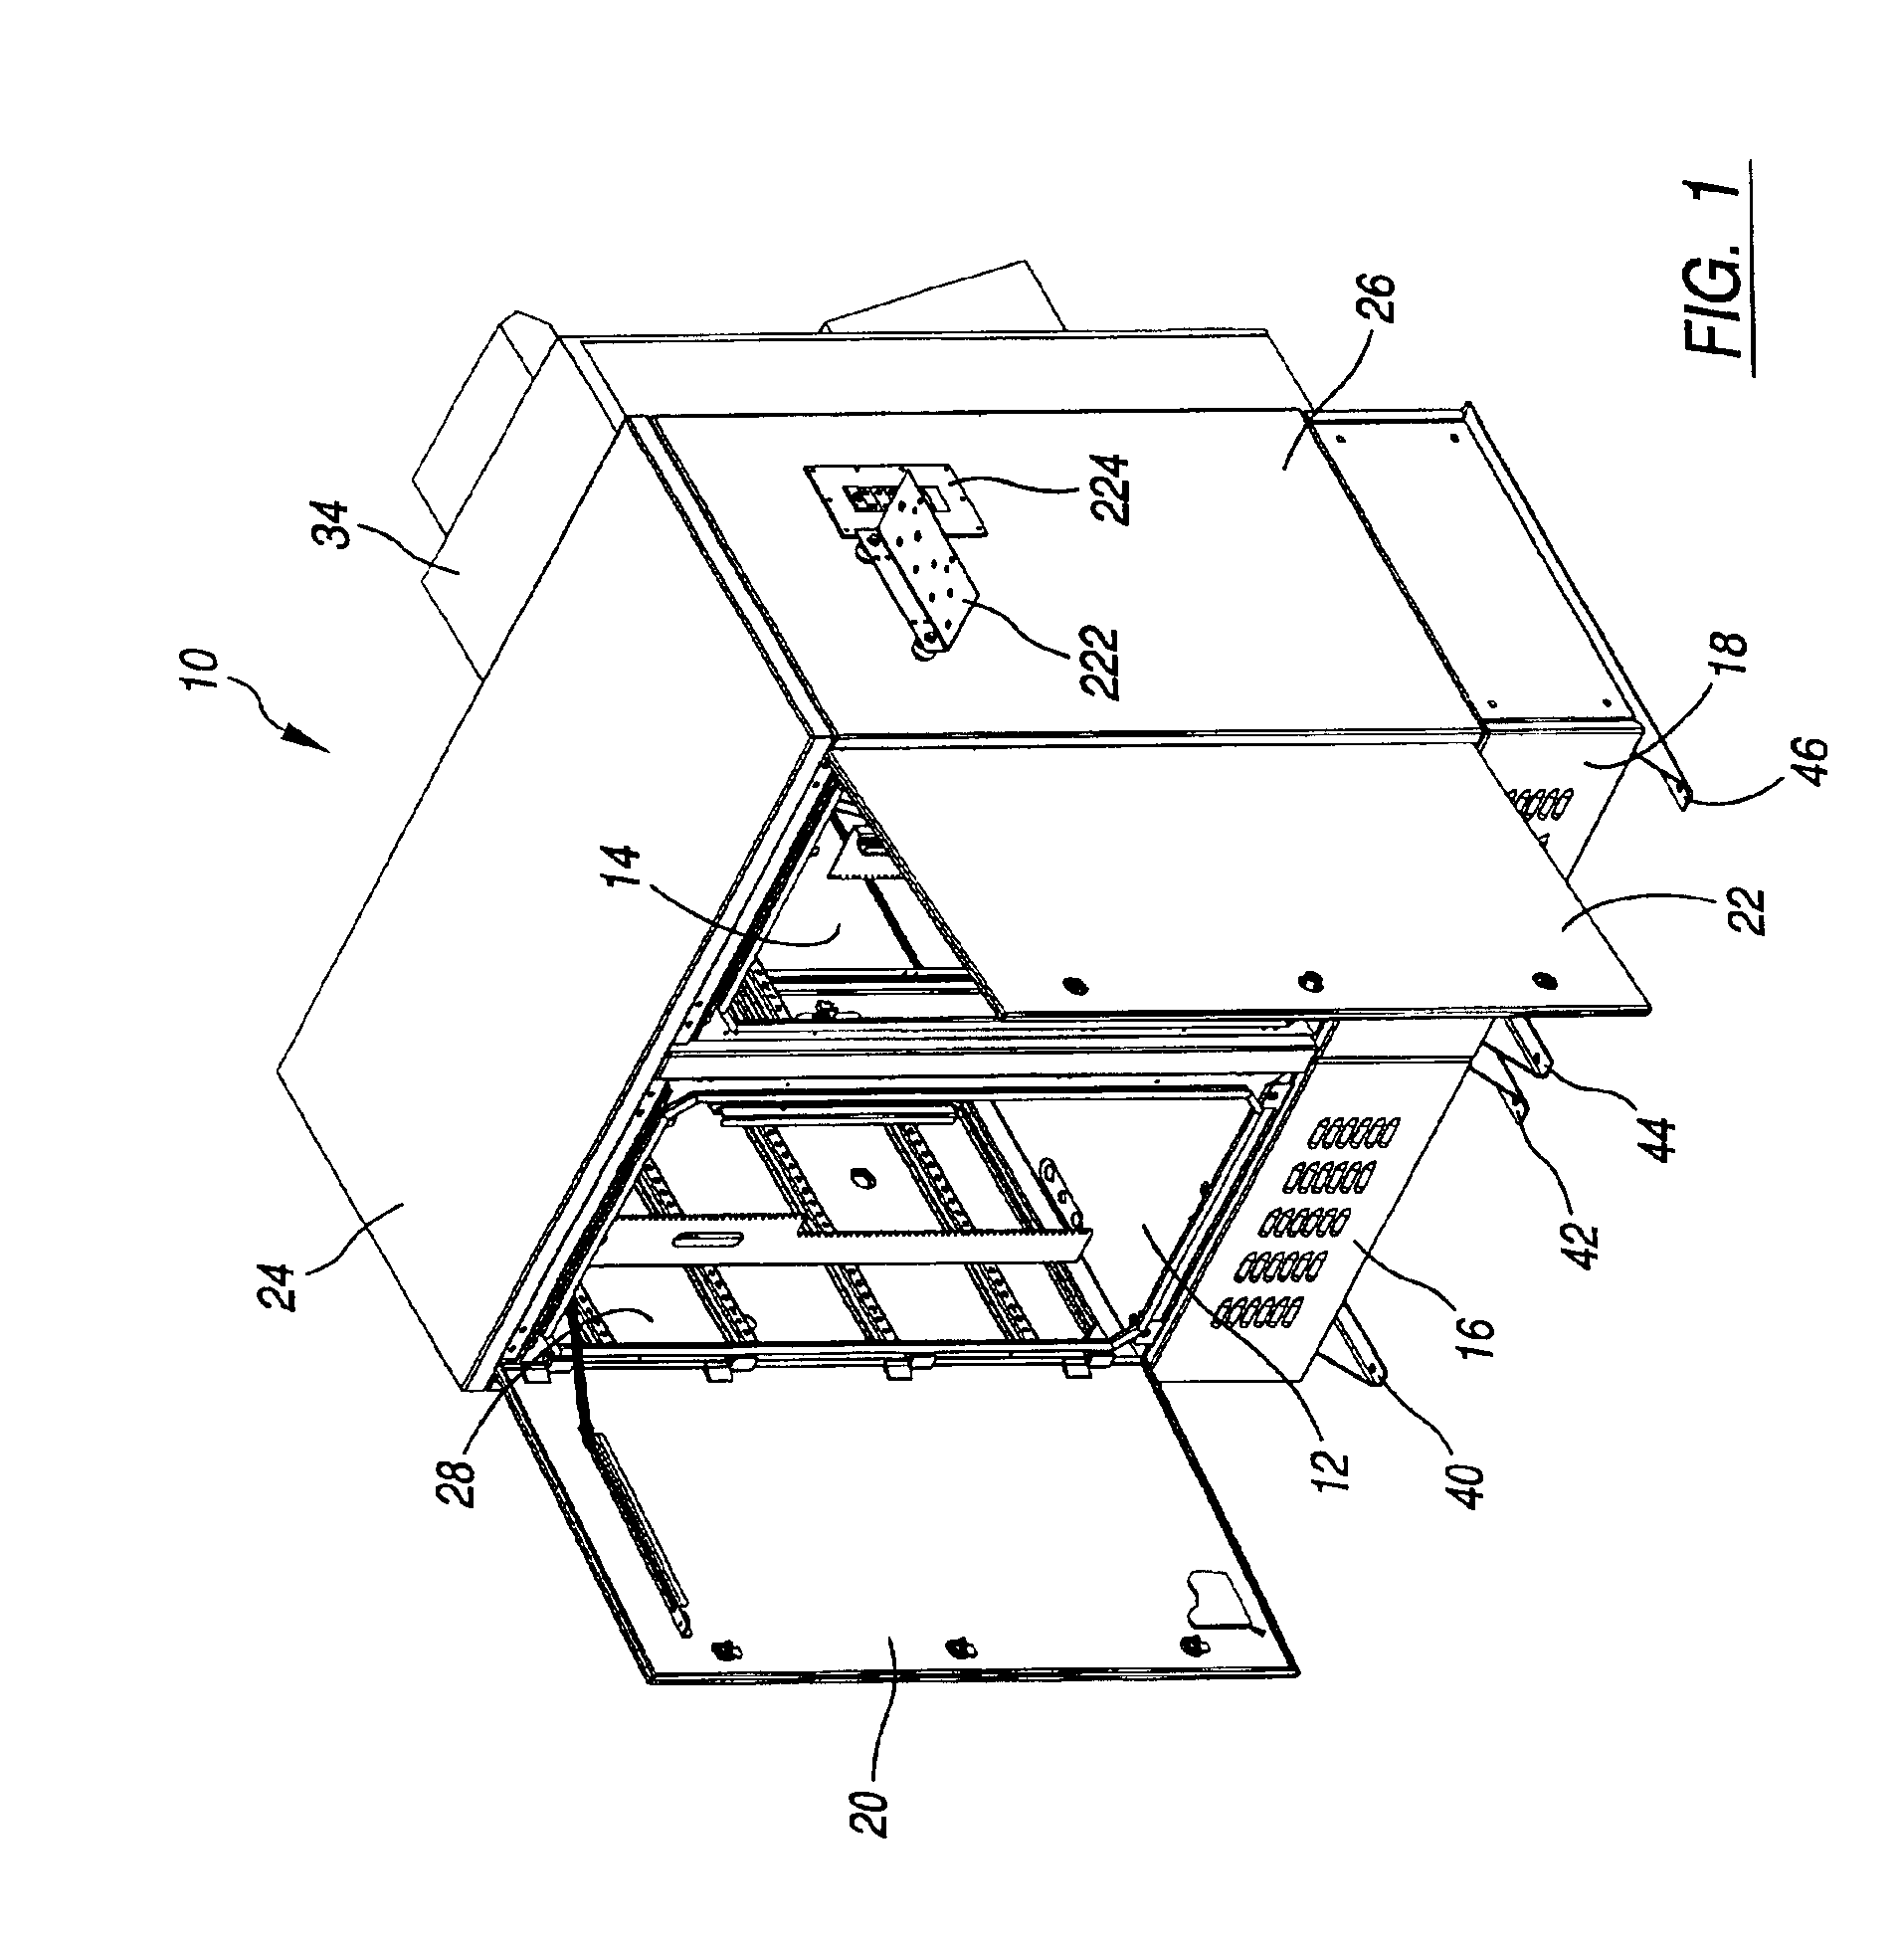 Modular enclosure system for electronic equipment